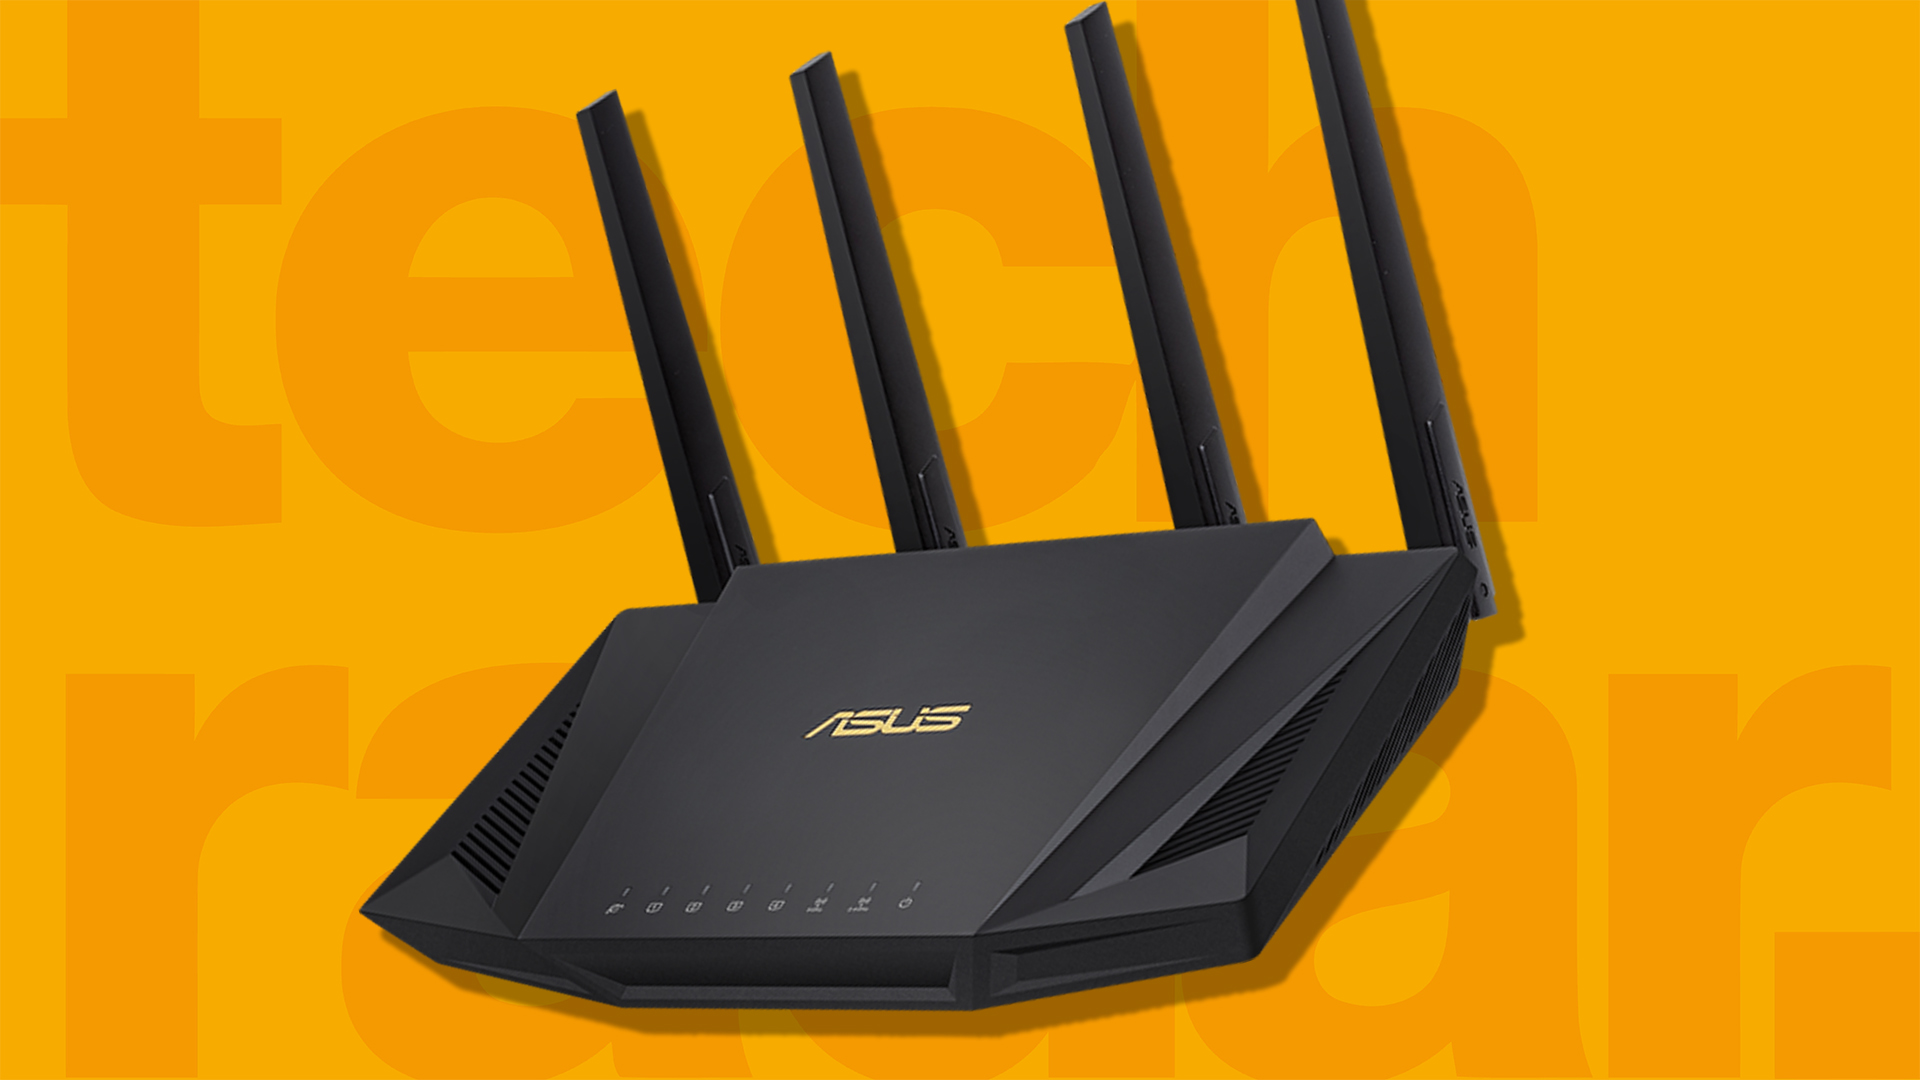 nødsituation forskellige Uredelighed The best Asus router 2023: top gaming routers from Asus | TechRadar